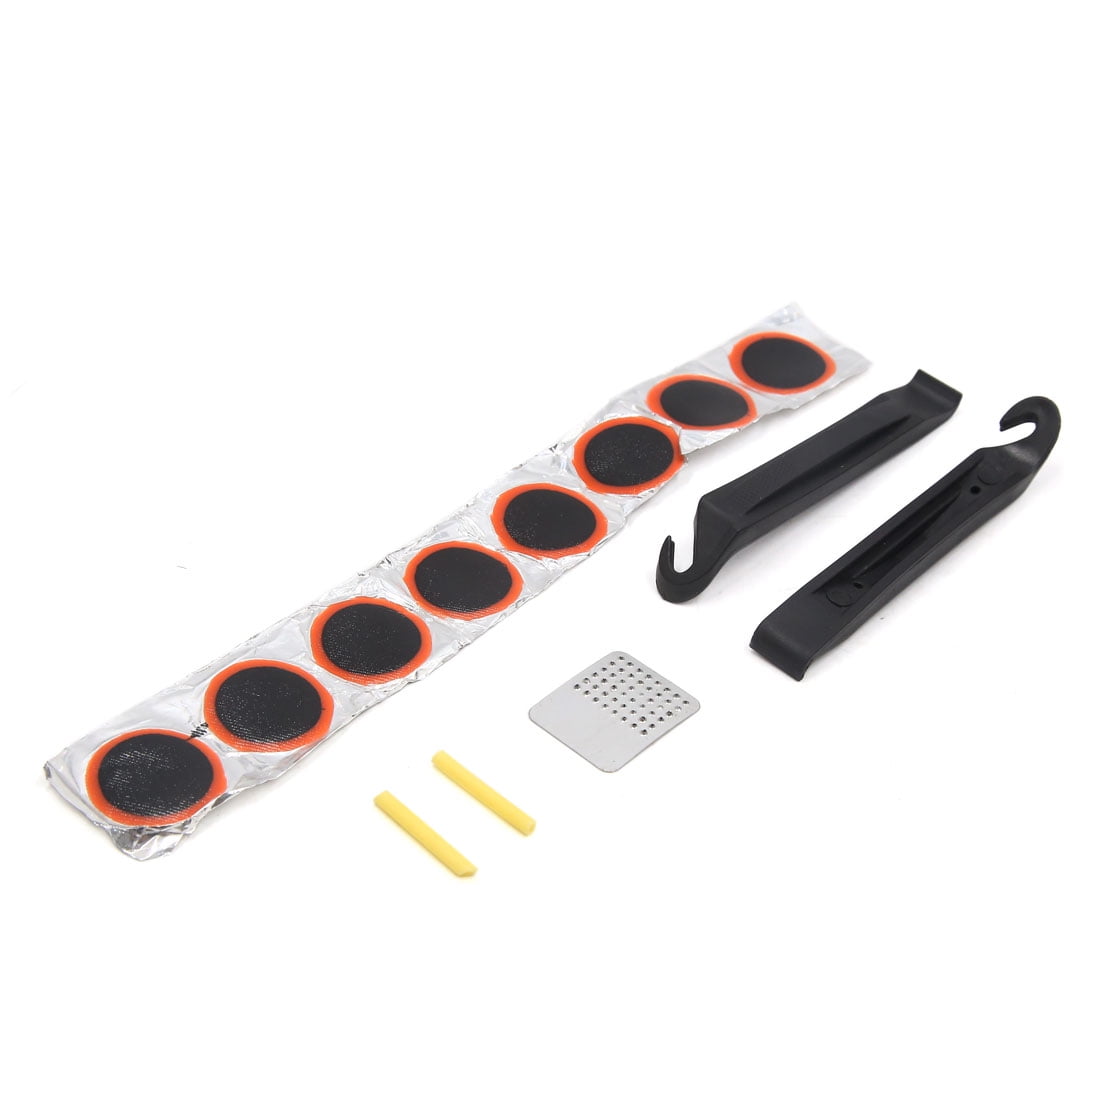 Bicycle Bike Tire Tyre*Rubber Patch Piece Puncture Repair Tool Kits KIKH 